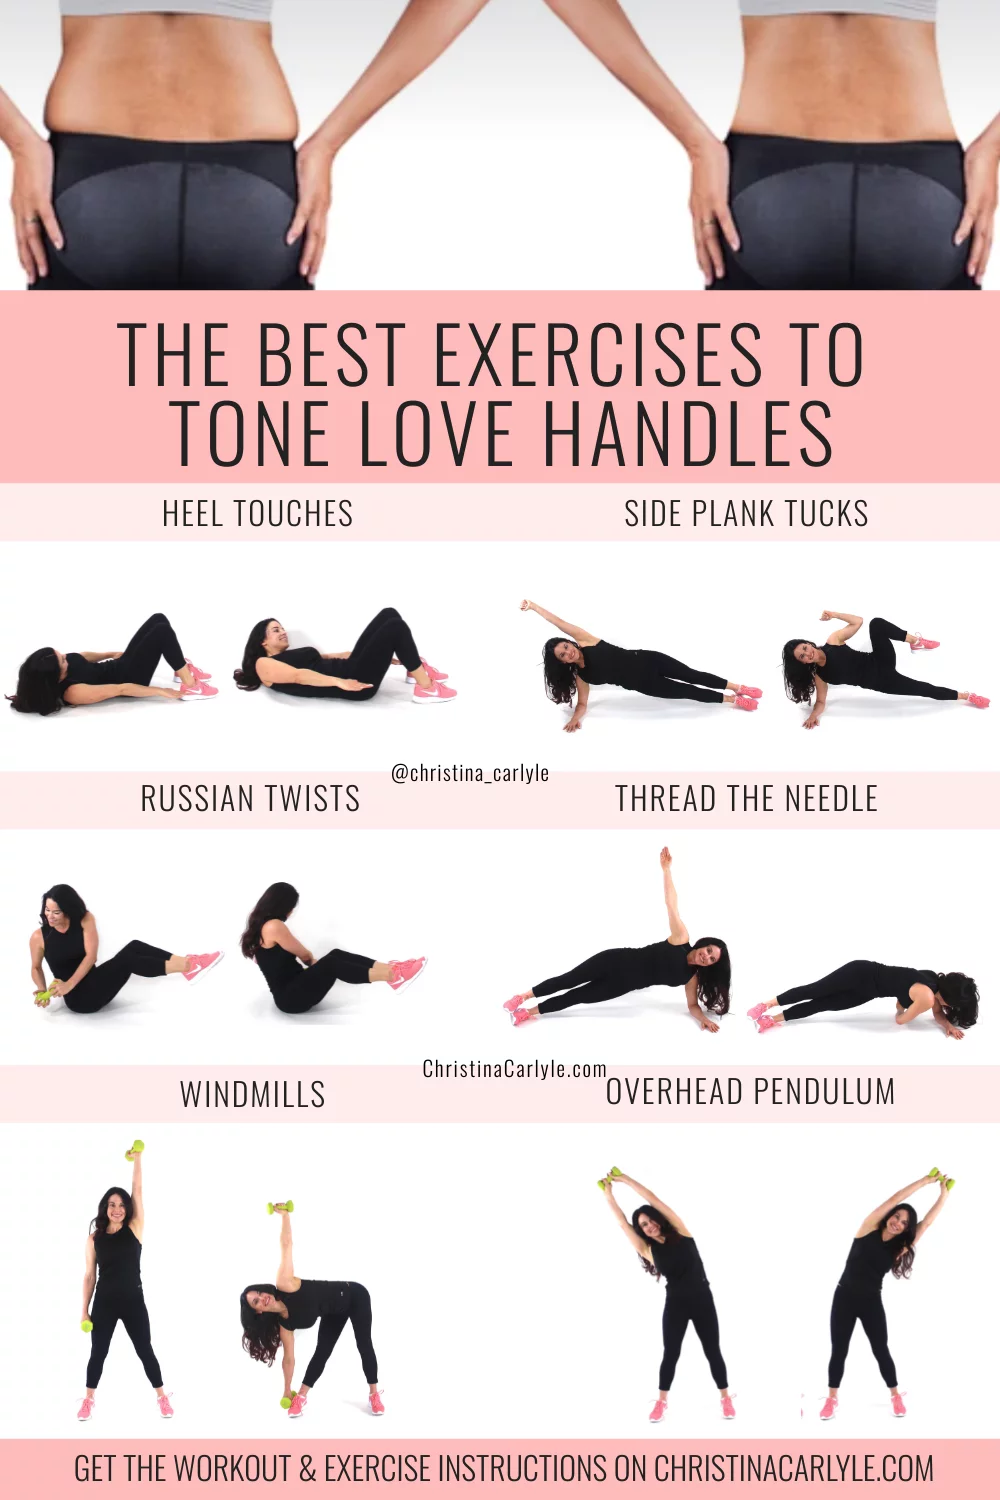 Get Rid of Your Love Handles Once and For All (a few great tips